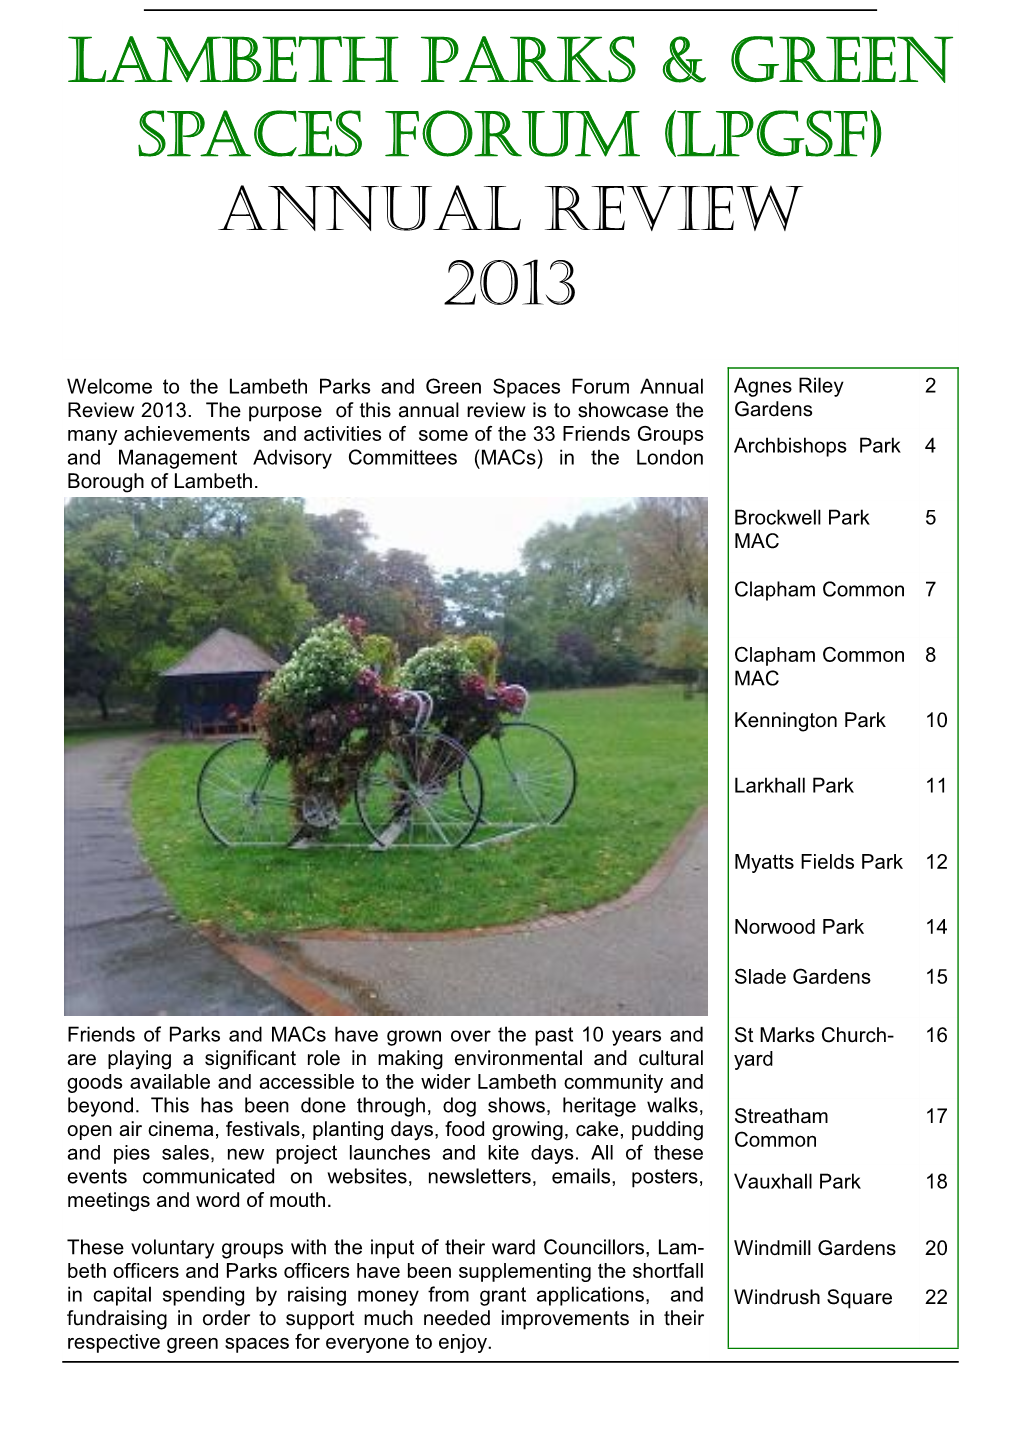 Lambeth Parks & Green Spaces Forum (LPGSF) Annual Review 2013